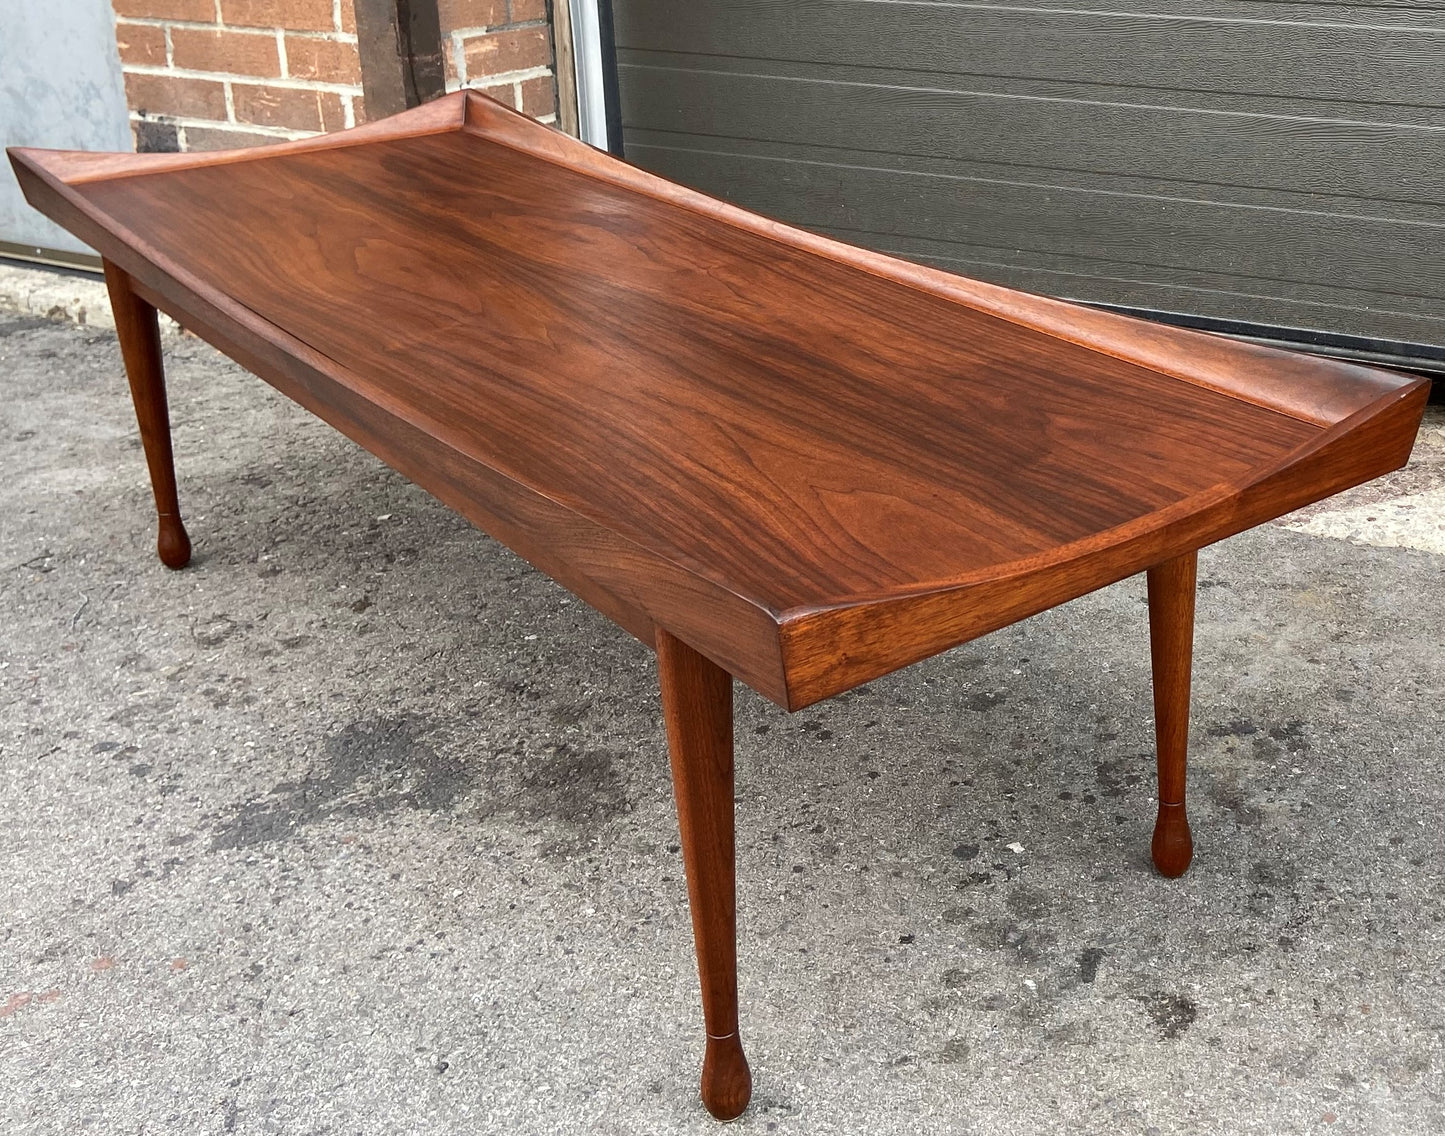 REFINISHED Mid Century Modern Walnut Coffee Table by Deilcraft 5ft